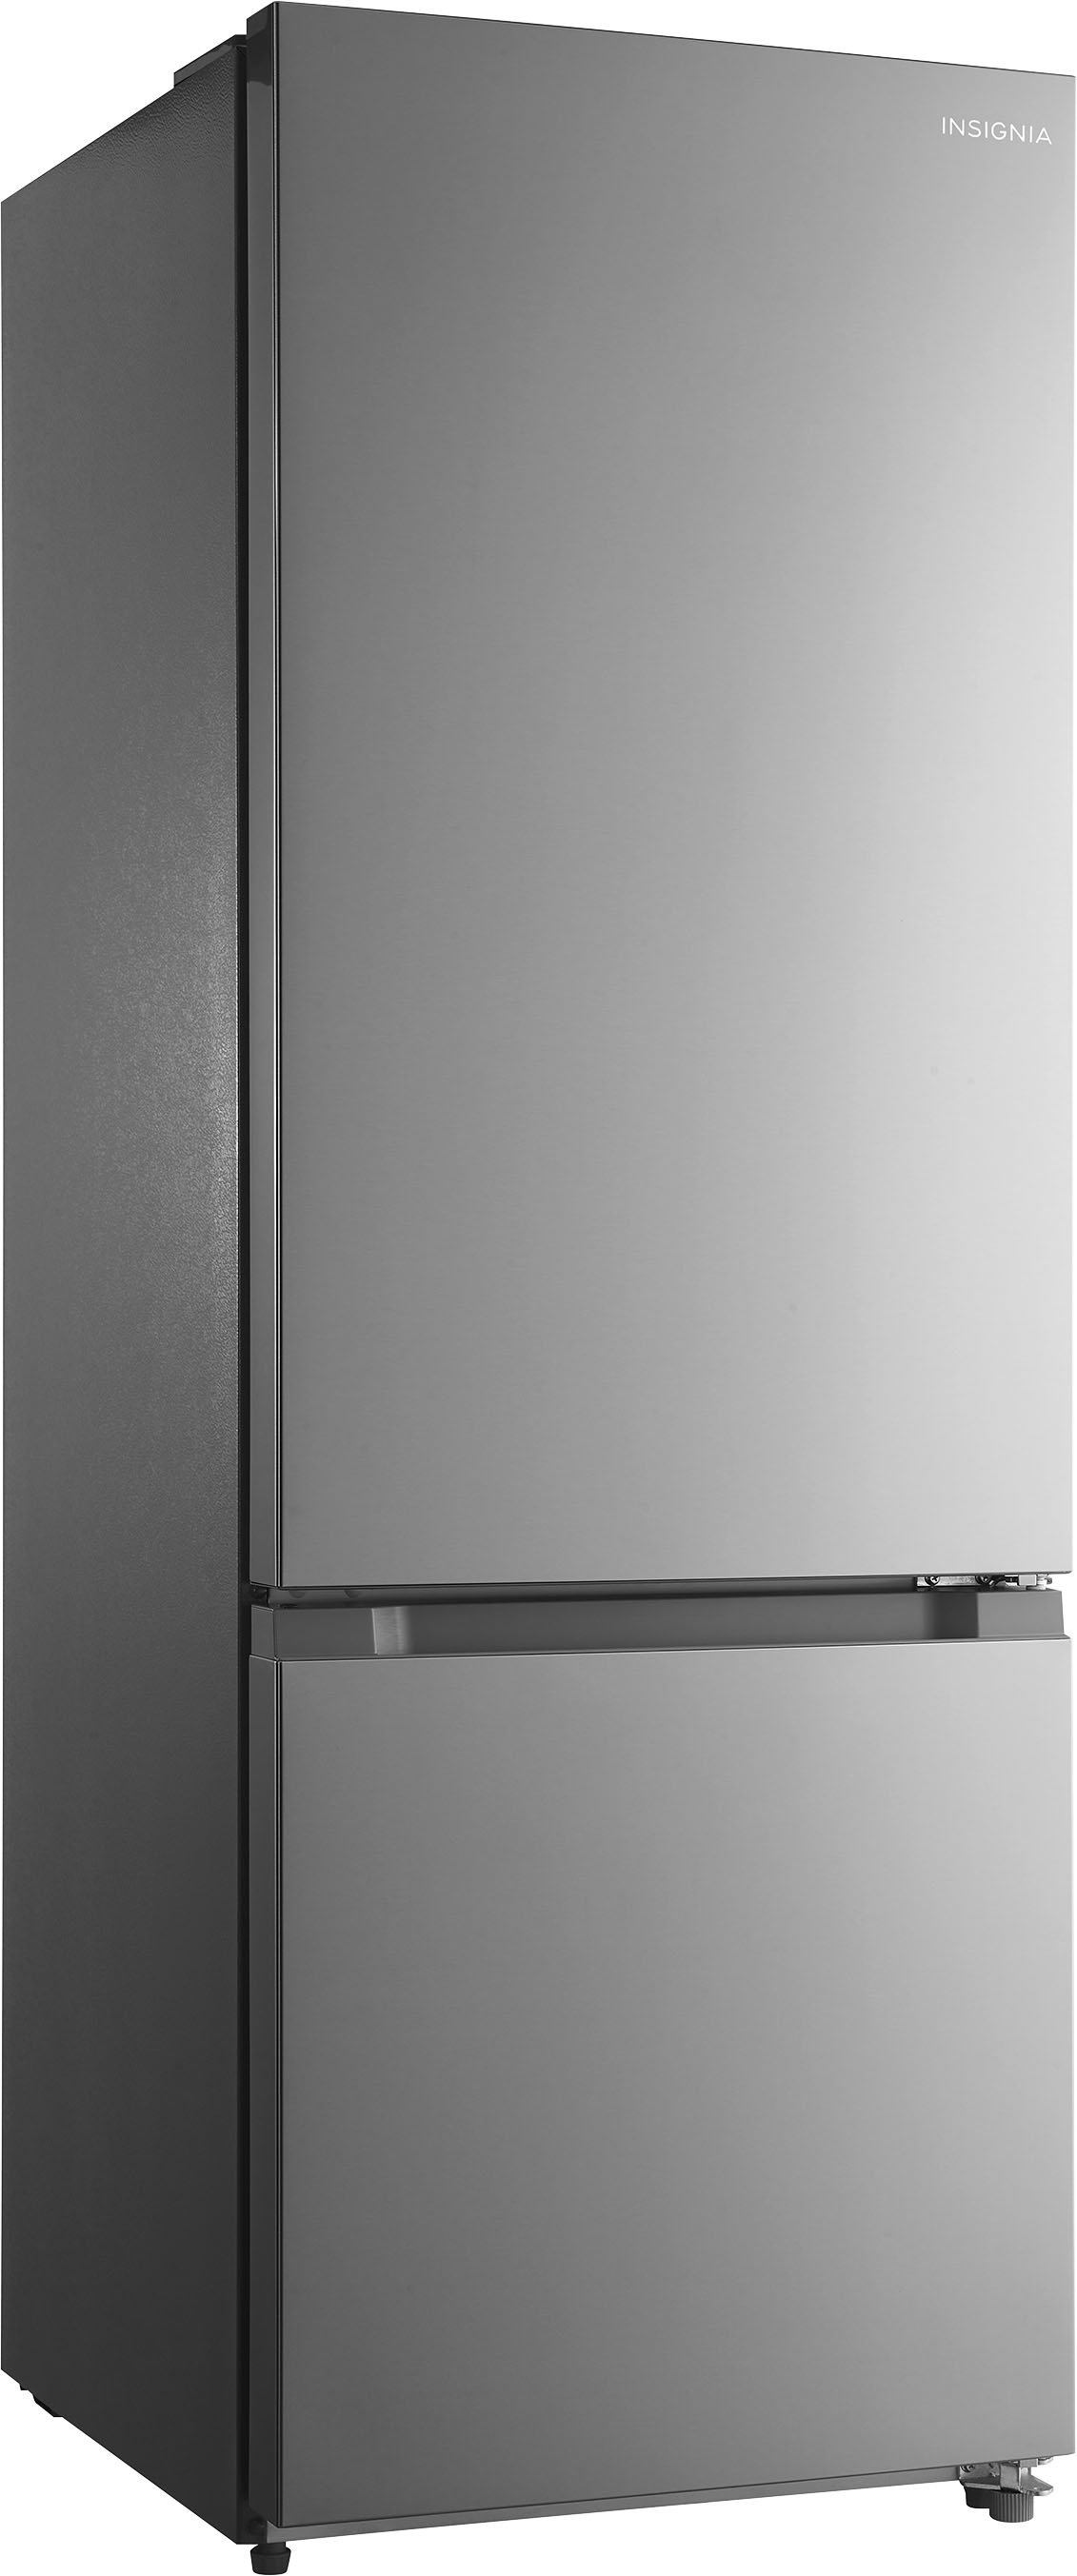 Angle View: Insignia™ - 11.5 Cu. Ft. Bottom Mount Refrigerator - Stainless steel